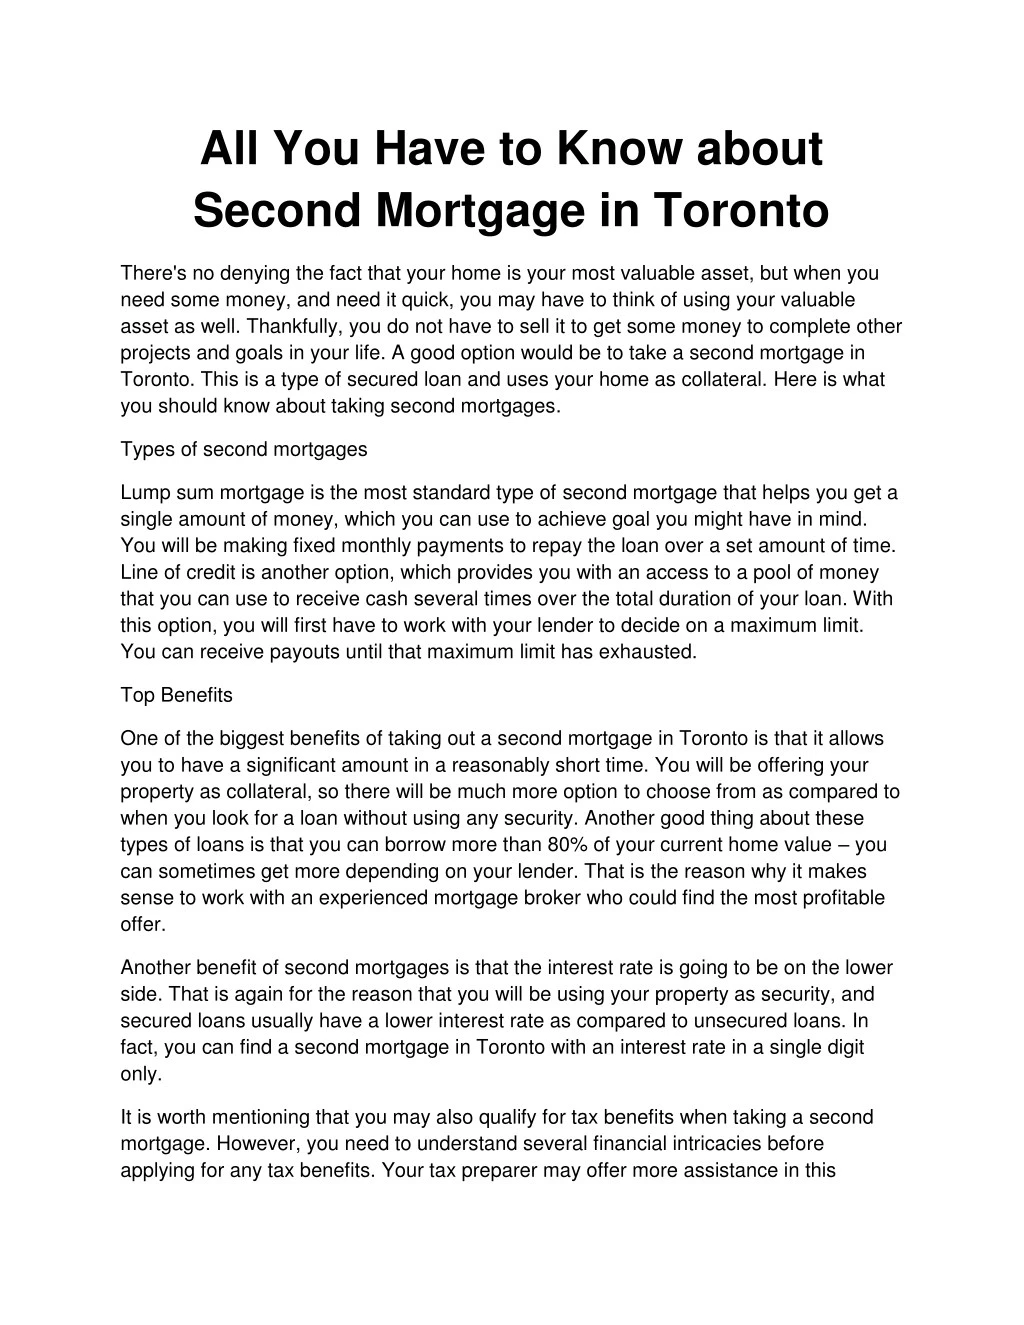 all you have to know about second mortgage